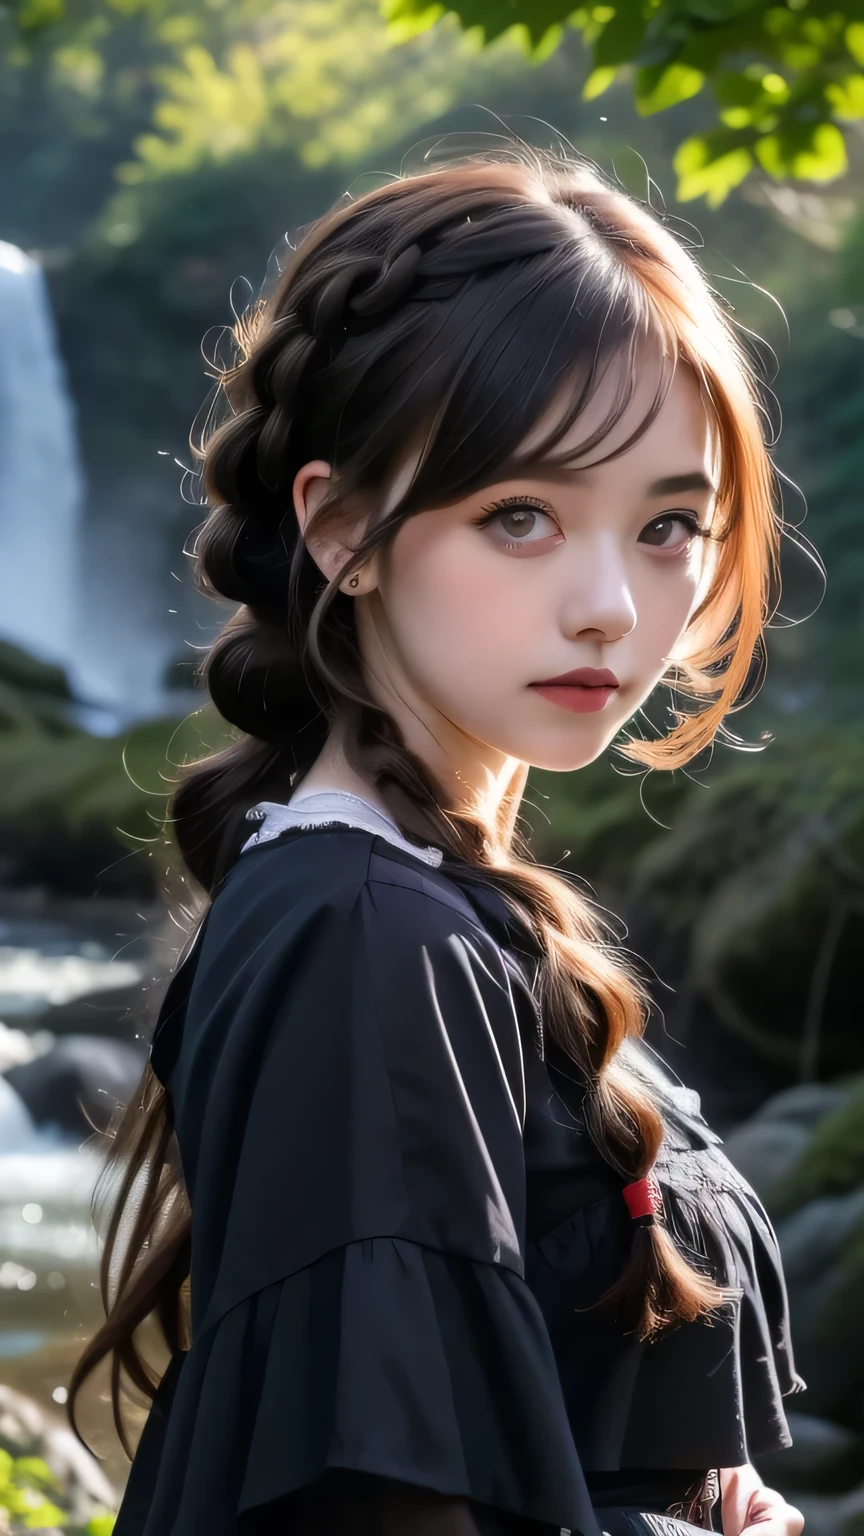 Beautiful woman with black eyes, Complex details, moderate, watercolor, splash､(Gothic Lolita), Upper Body, RAW Photos, Realistic, 4K/8K clear photo of a woman standing in front of a forest and a large waterfall, (iris), Super detailed, detaileds, Dramatic Light, Beautiful eyes in every detail, detaileded skin, Written boundary depth, RAW Photos, Full resolution, High resolutionの肌, detailed, Sharp focus, masterpiece, 最high quality, high quality, High resolution, Dark Gothic Lolita, Upper Bodyのポートレート, (Red hair with curly braids)、